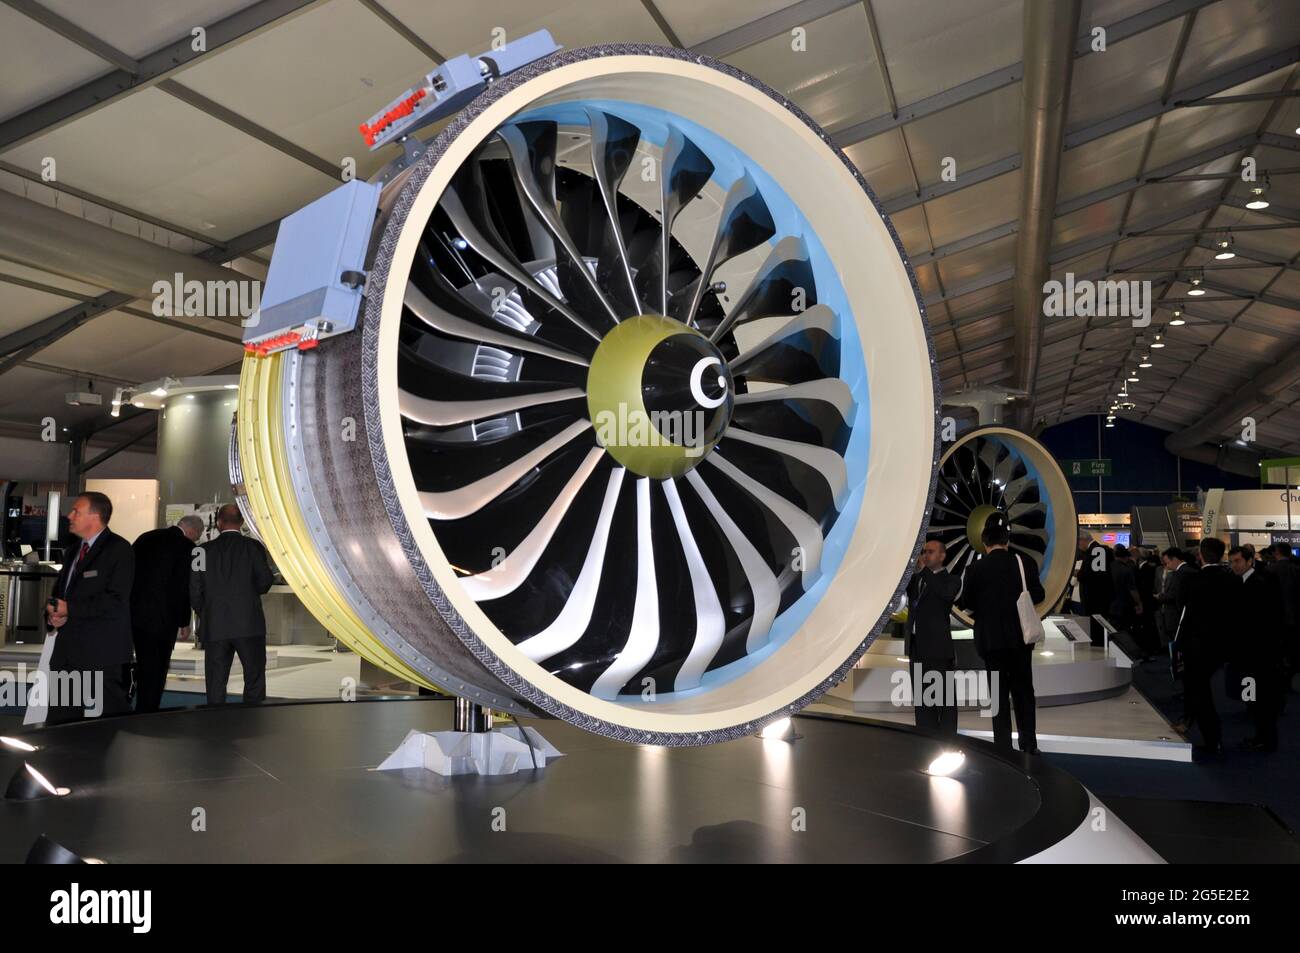 CFM International LEAP high-bypass turbofan engine display stand at the Farnborough International Airshow trade fair 2012, UK. Busy hall with people Stock Photo